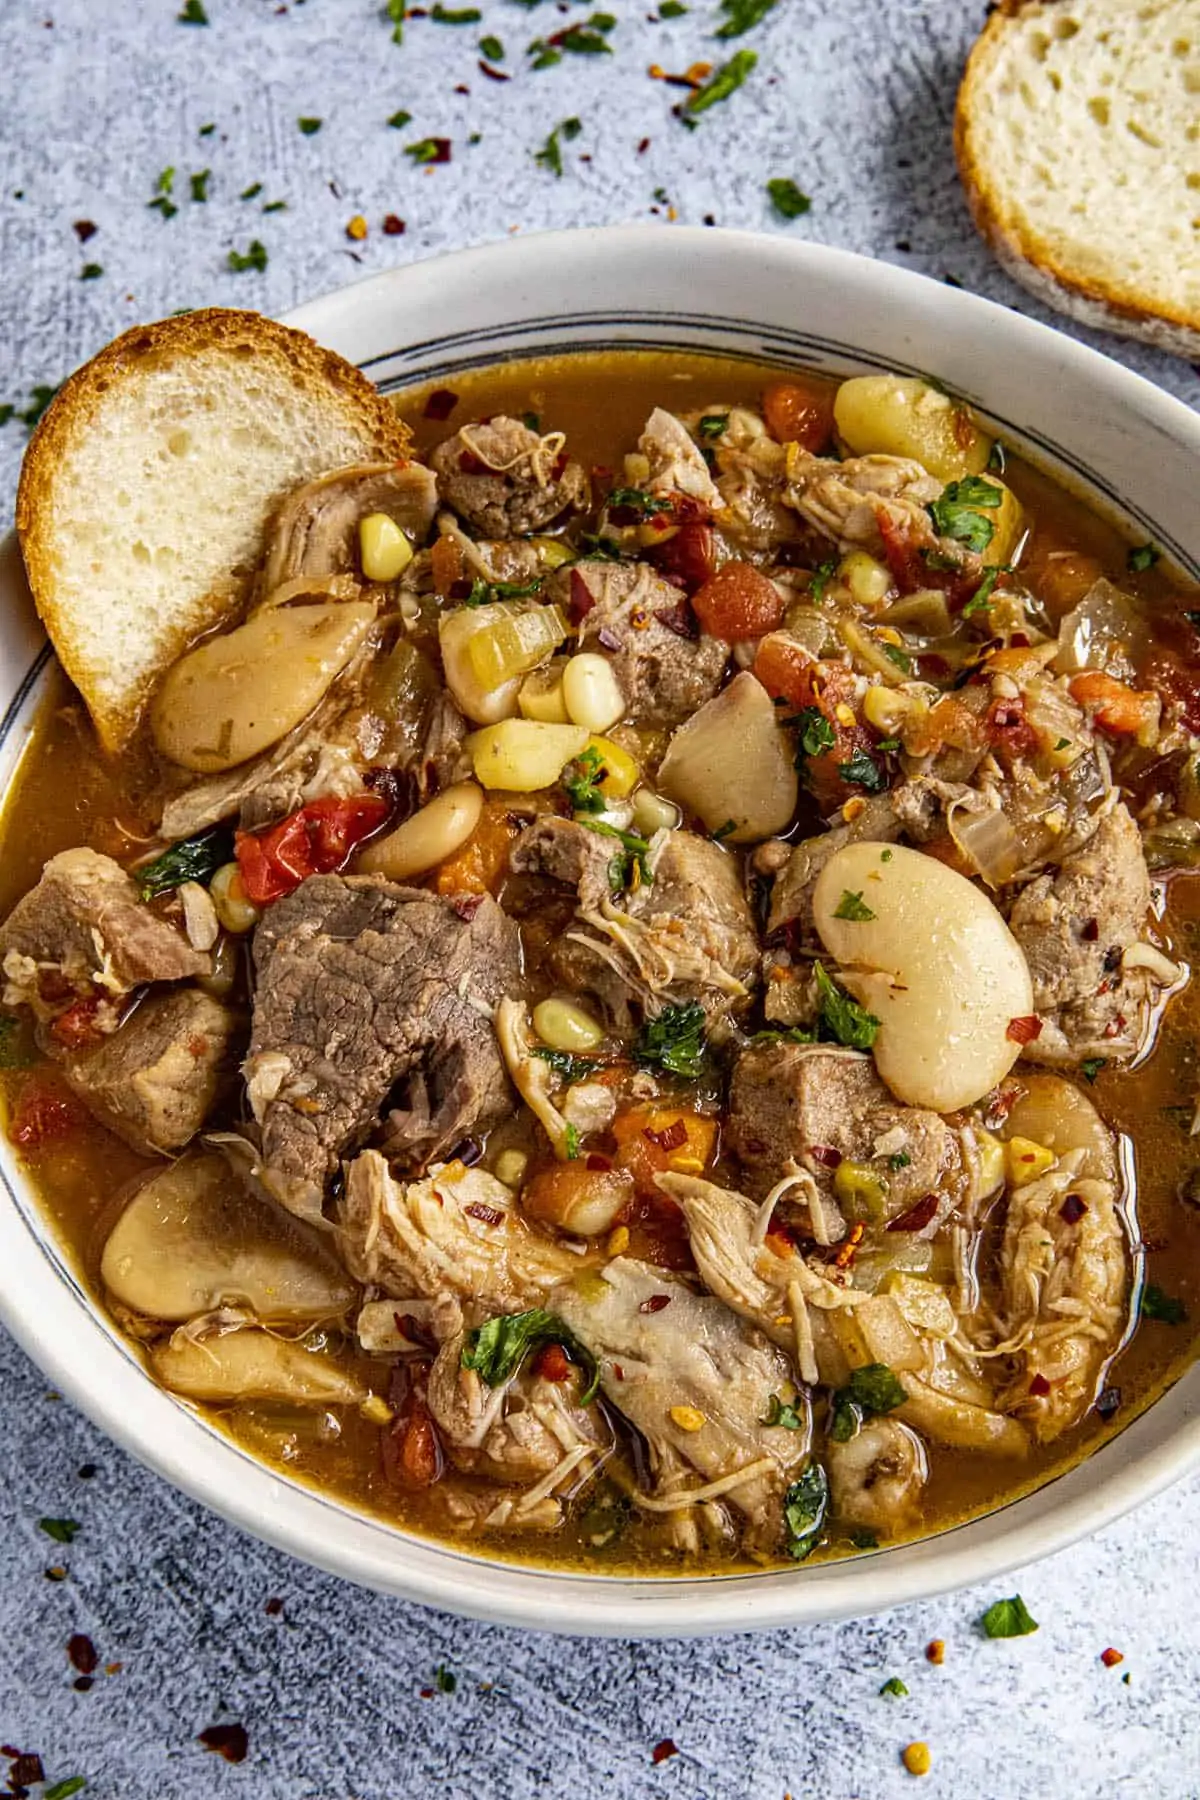 Chunky burgoo stew in a bowl with bread